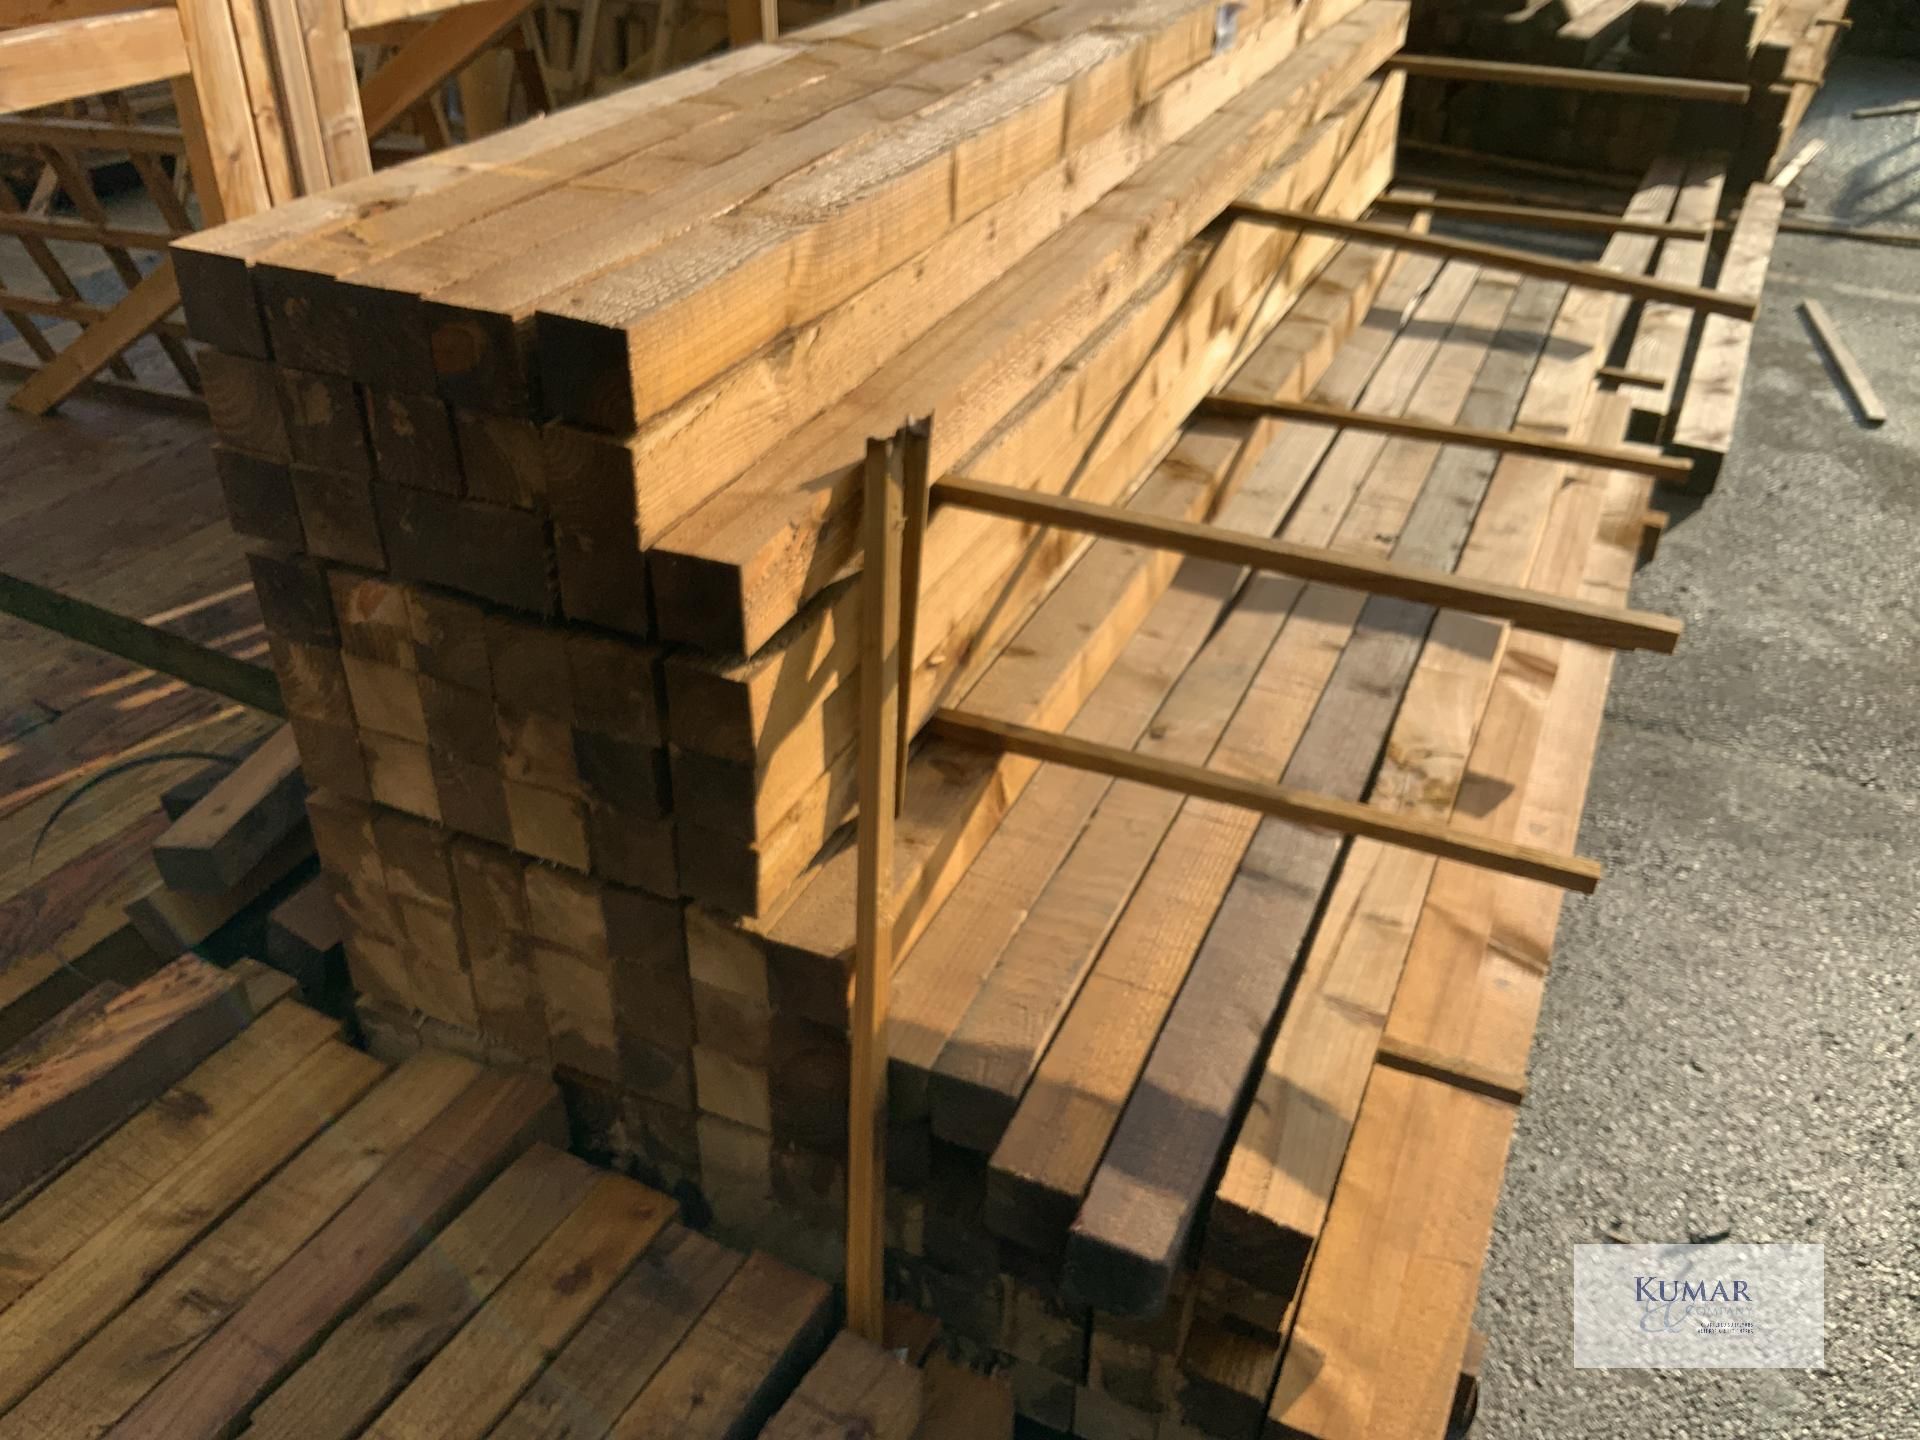 52: 2.4M x 70 mm x 70mm Rough Sawn Timber - Image 3 of 3